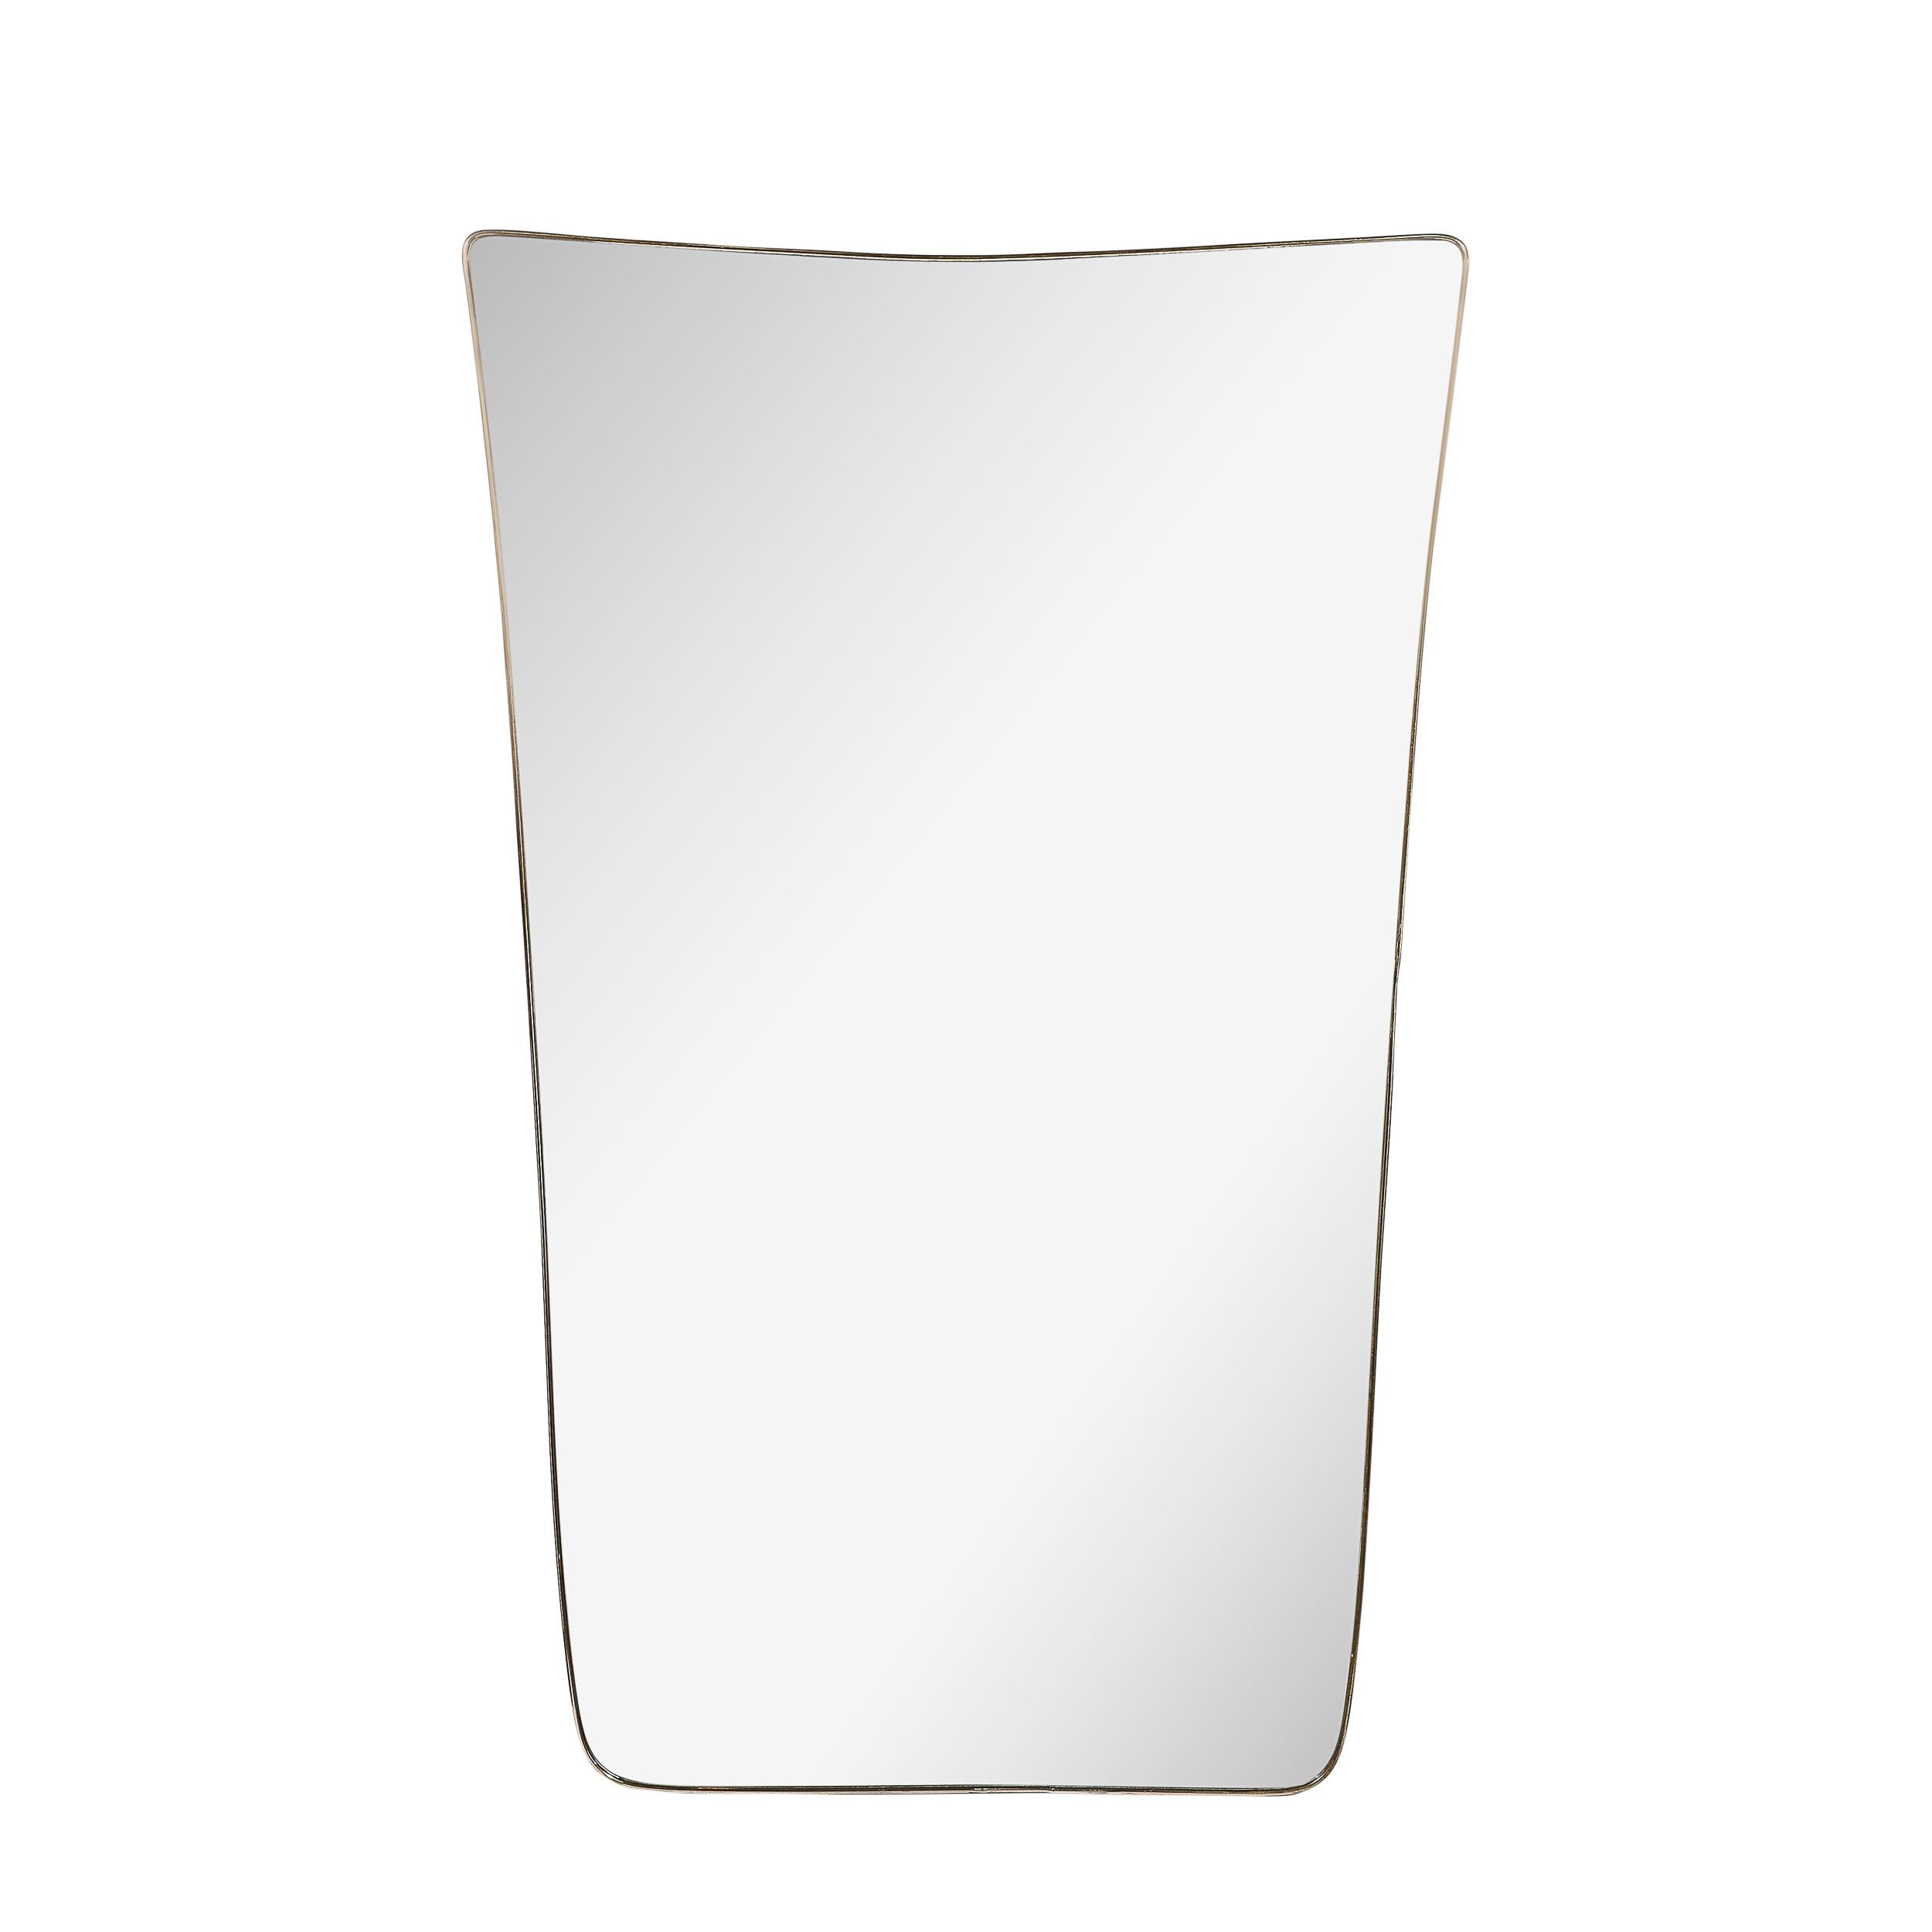 This minimal and beautifully made Mid-Century Modernist Tapered Trapezoidal Brass Wrapped Mirror originates from Italy, Circa 1960. Features a stunning tapered silhouette with rounded top corners and a beautifully tapered sides with a flat lower